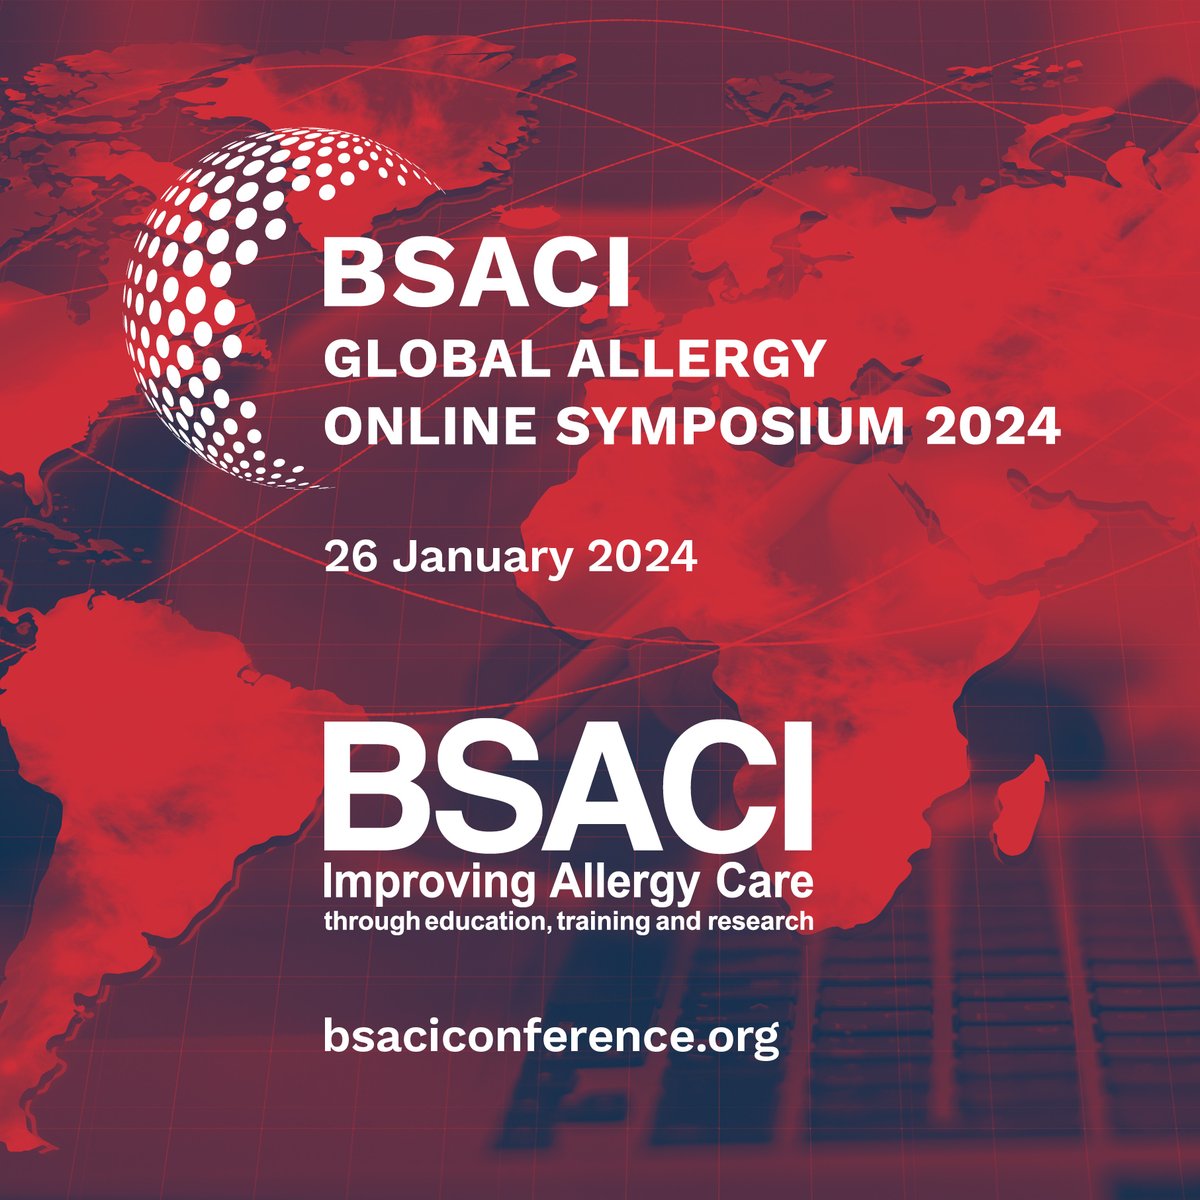 #BSACISOTA24: Register by Friday 29th December to receive the early bird discounted rate for our Global Allergy Online Symposium on 26th January 2024, in partnership with @worldallergy, @AAAAI_org and @EAACI_HQ bsaciconference.org @BSACI_Allergy